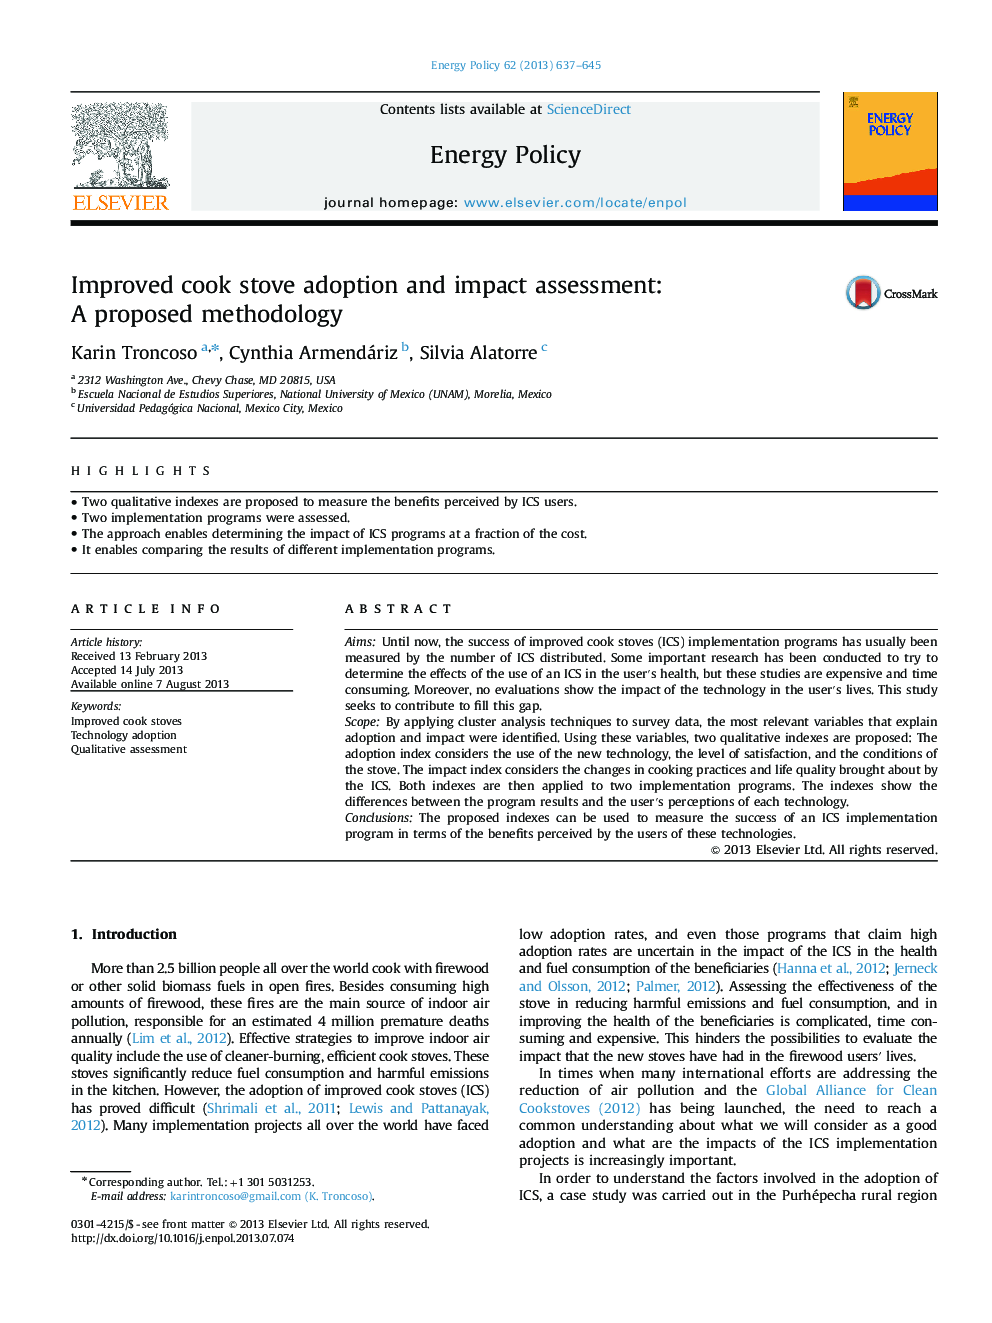 Improved cook stove adoption and impact assessment: A proposed methodology